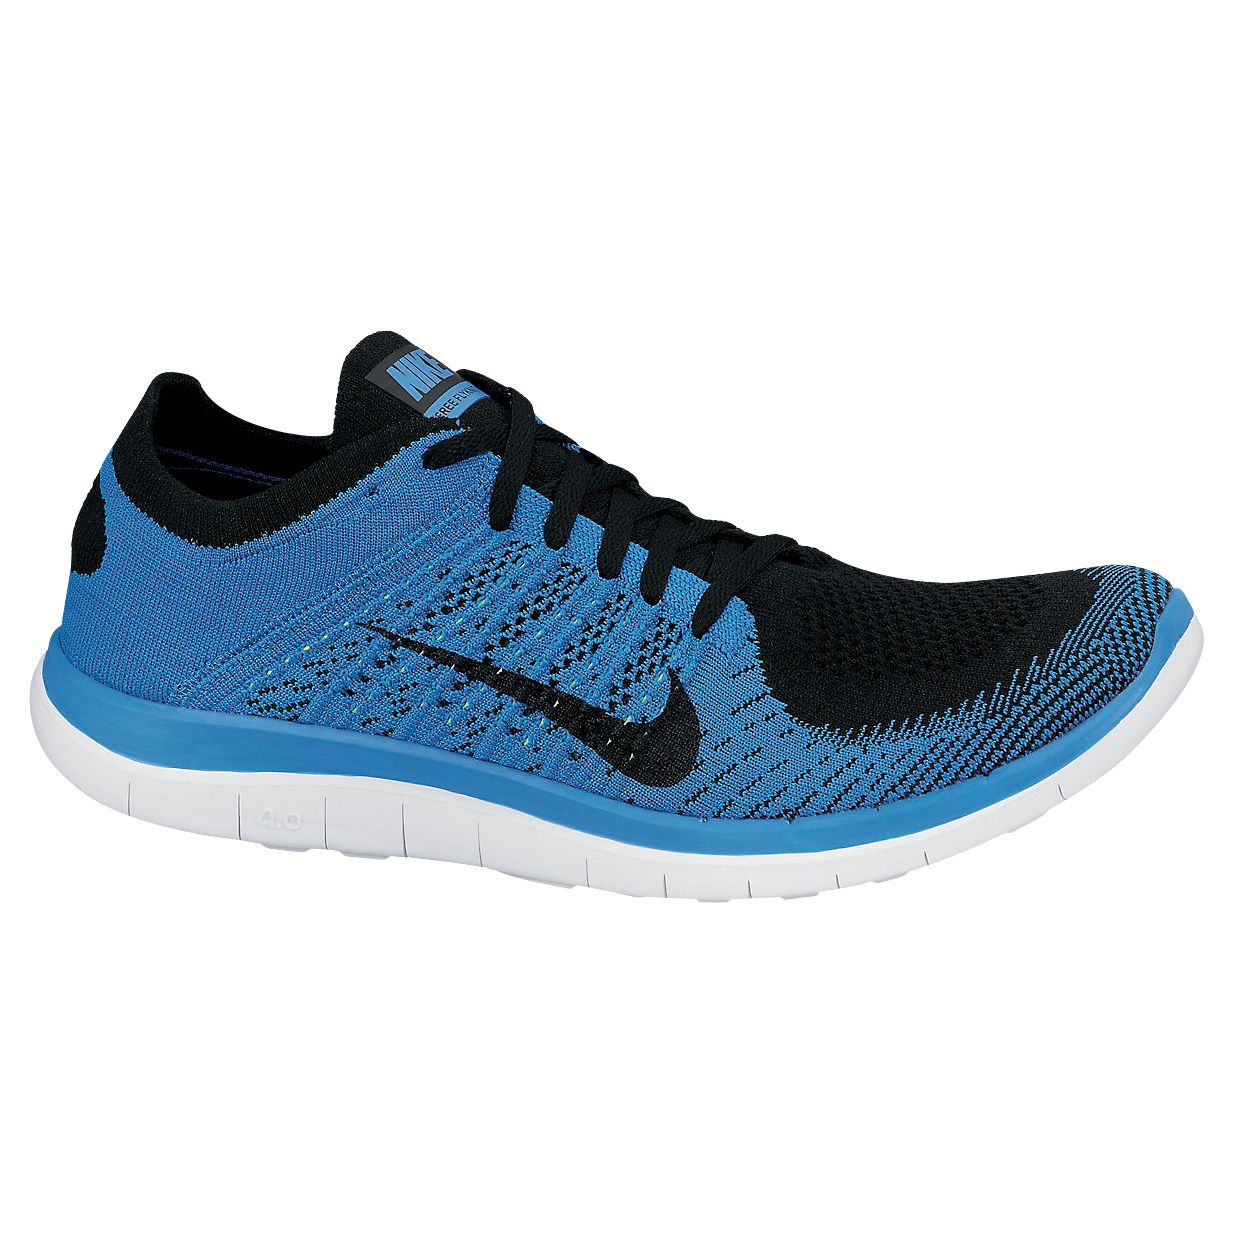 Free 4.0 Flyknit Running Shoes, Blue 